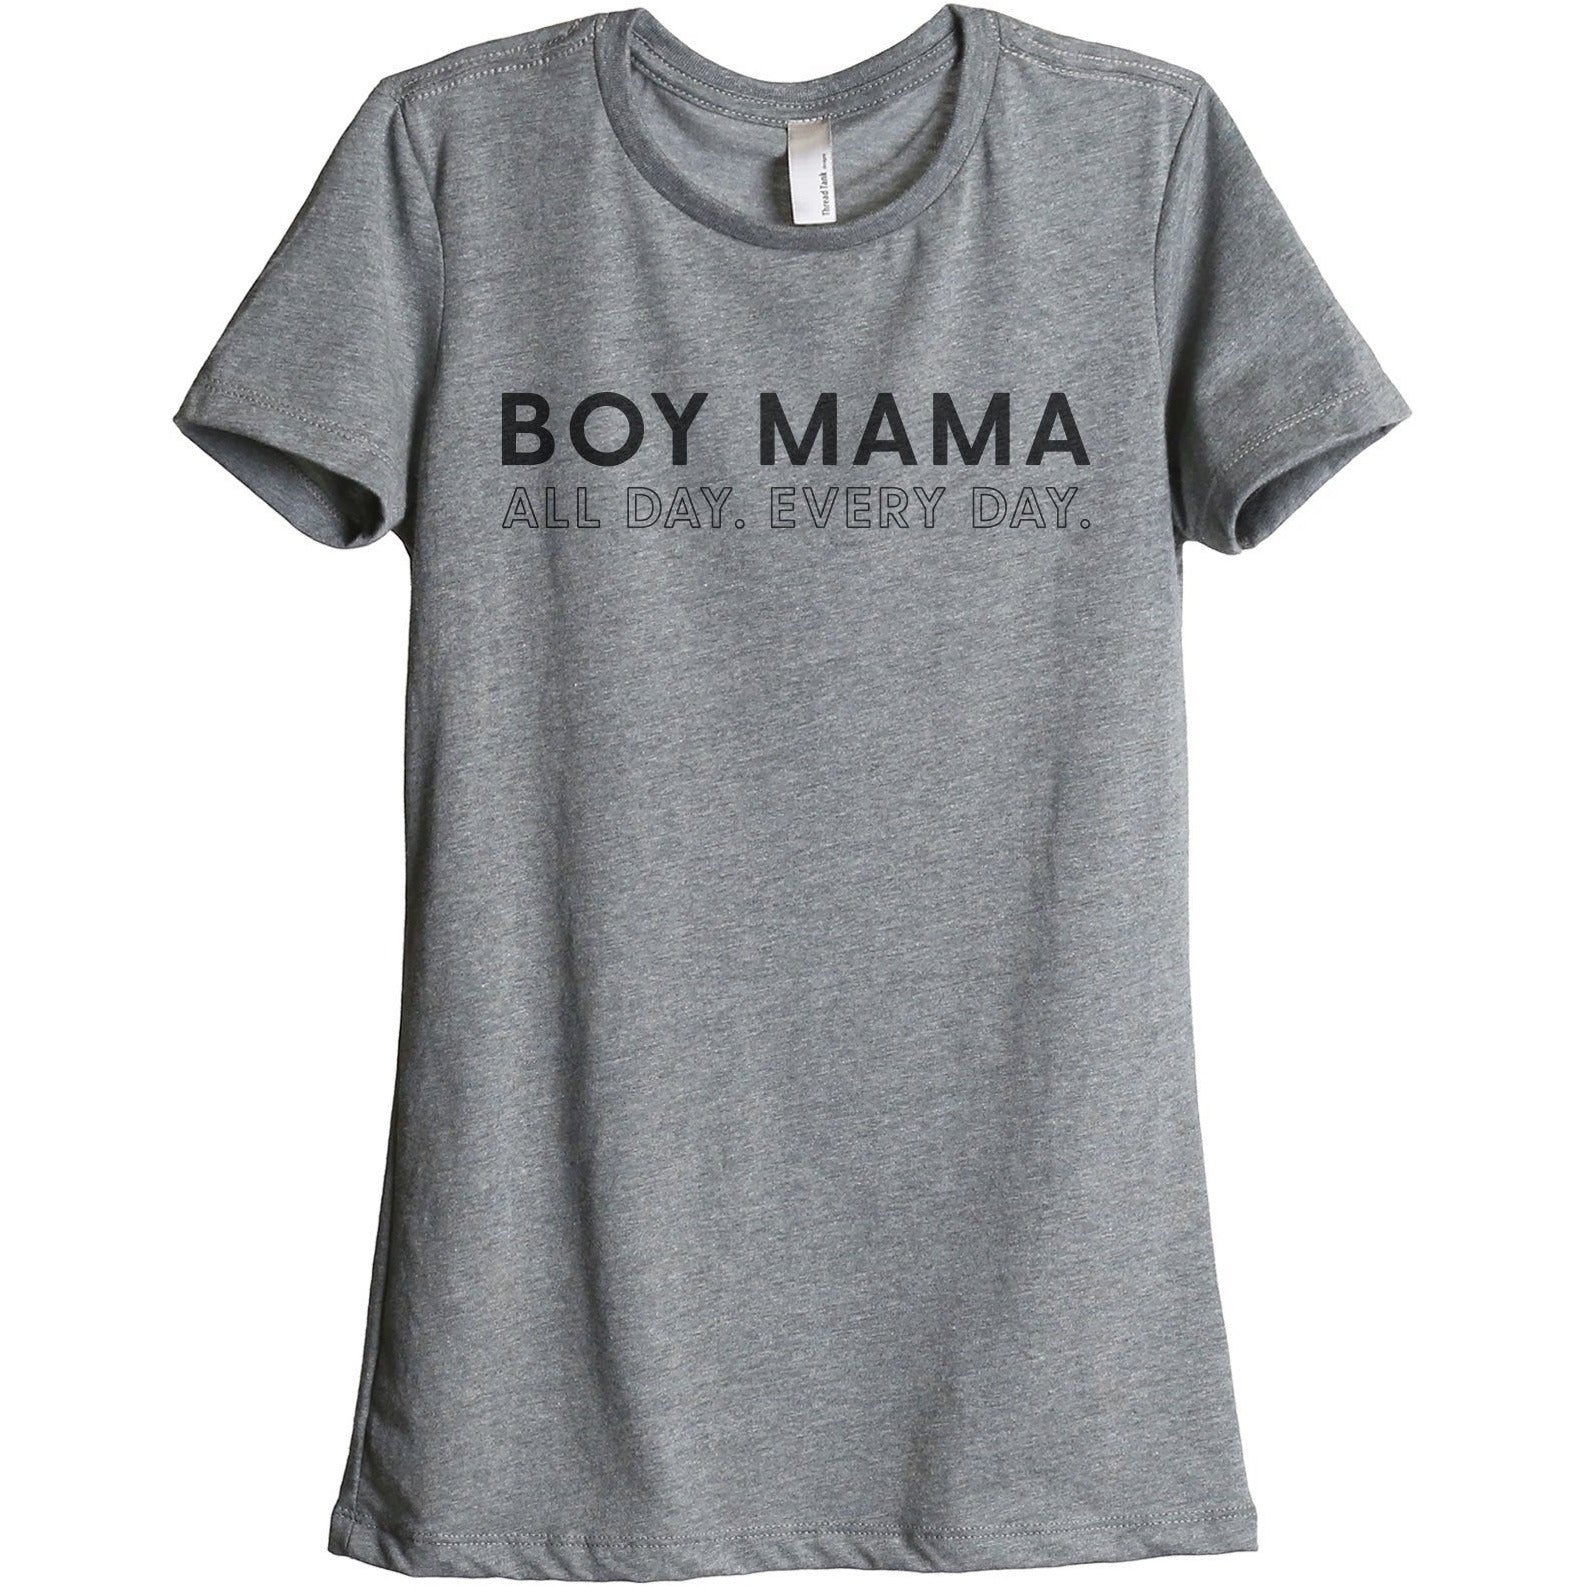 Boy Mama All Day Every Day Women's Relaxed Crewneck T-Shirt Top Tee Heather Grey